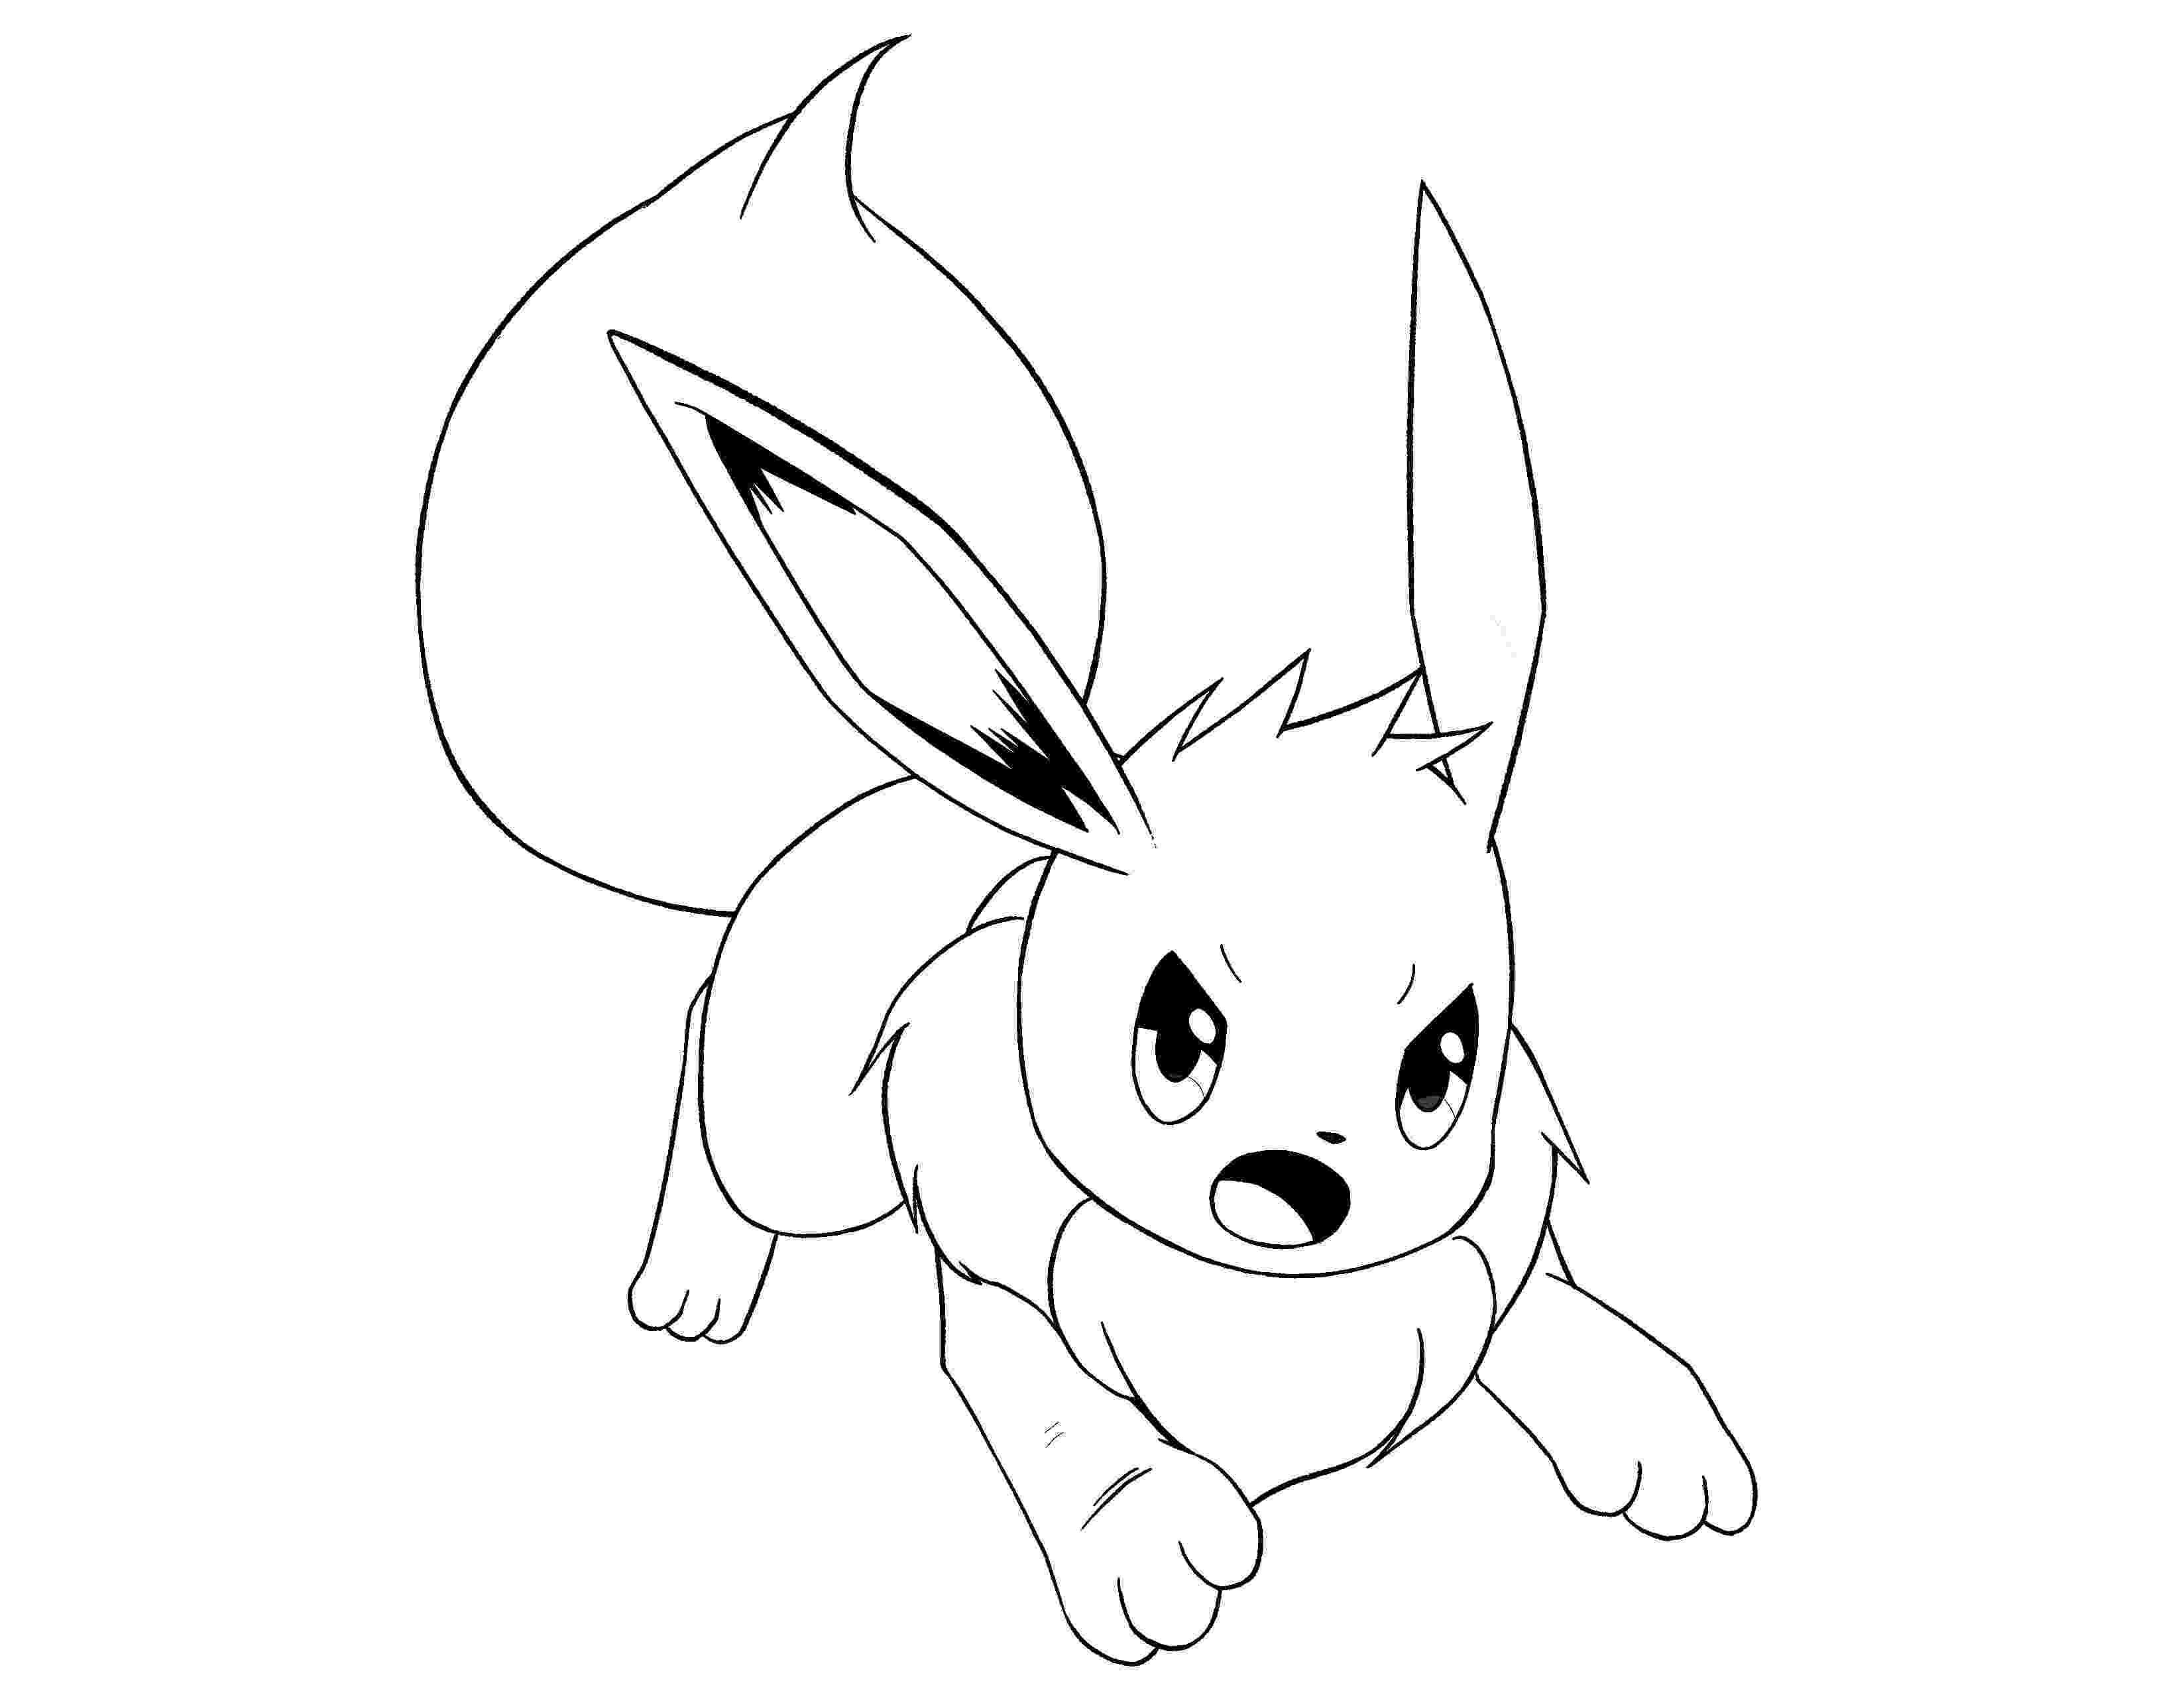 eevee printable coloring pages eevee coloring pages to print gallery free coloring sheets printable coloring eevee pages 